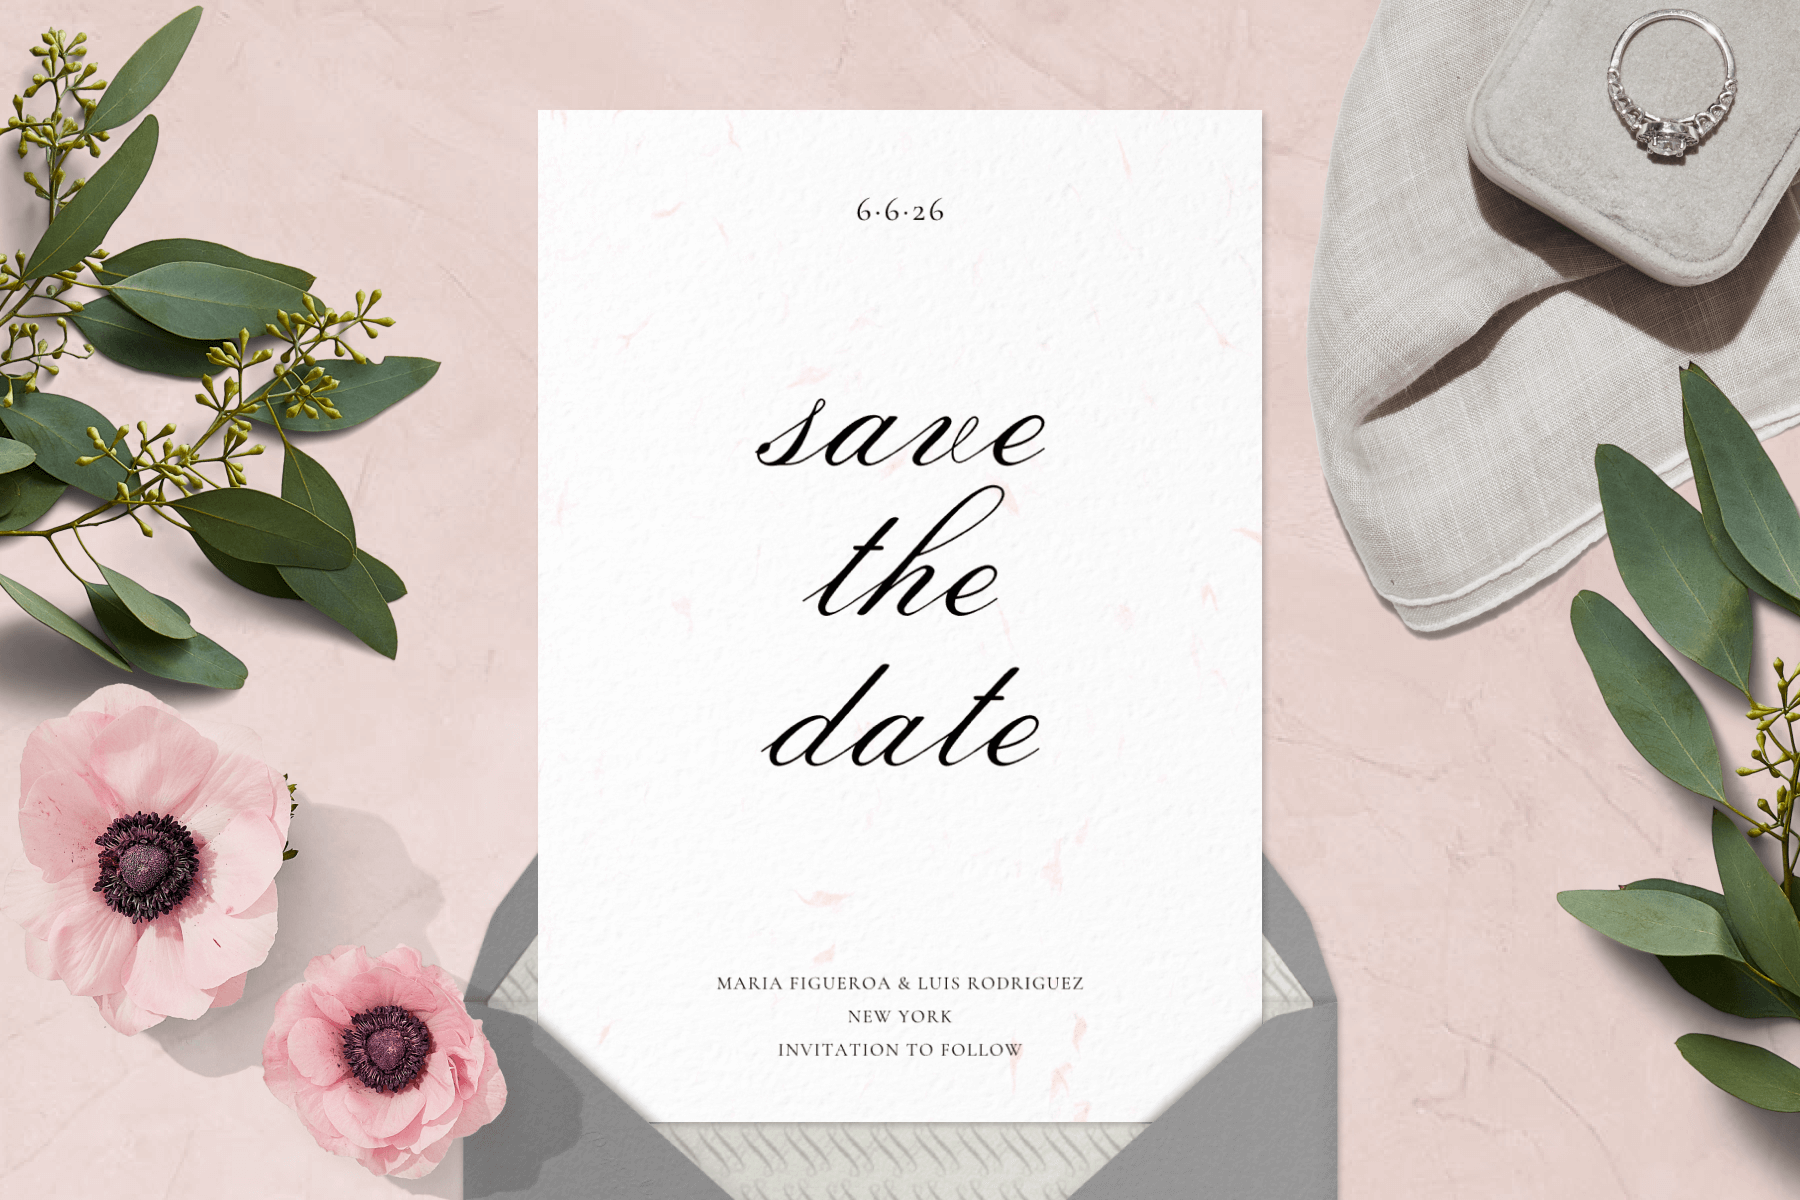 A white save the date with black cursive lettering in the center, surrounded by flowers and a diamond ring.